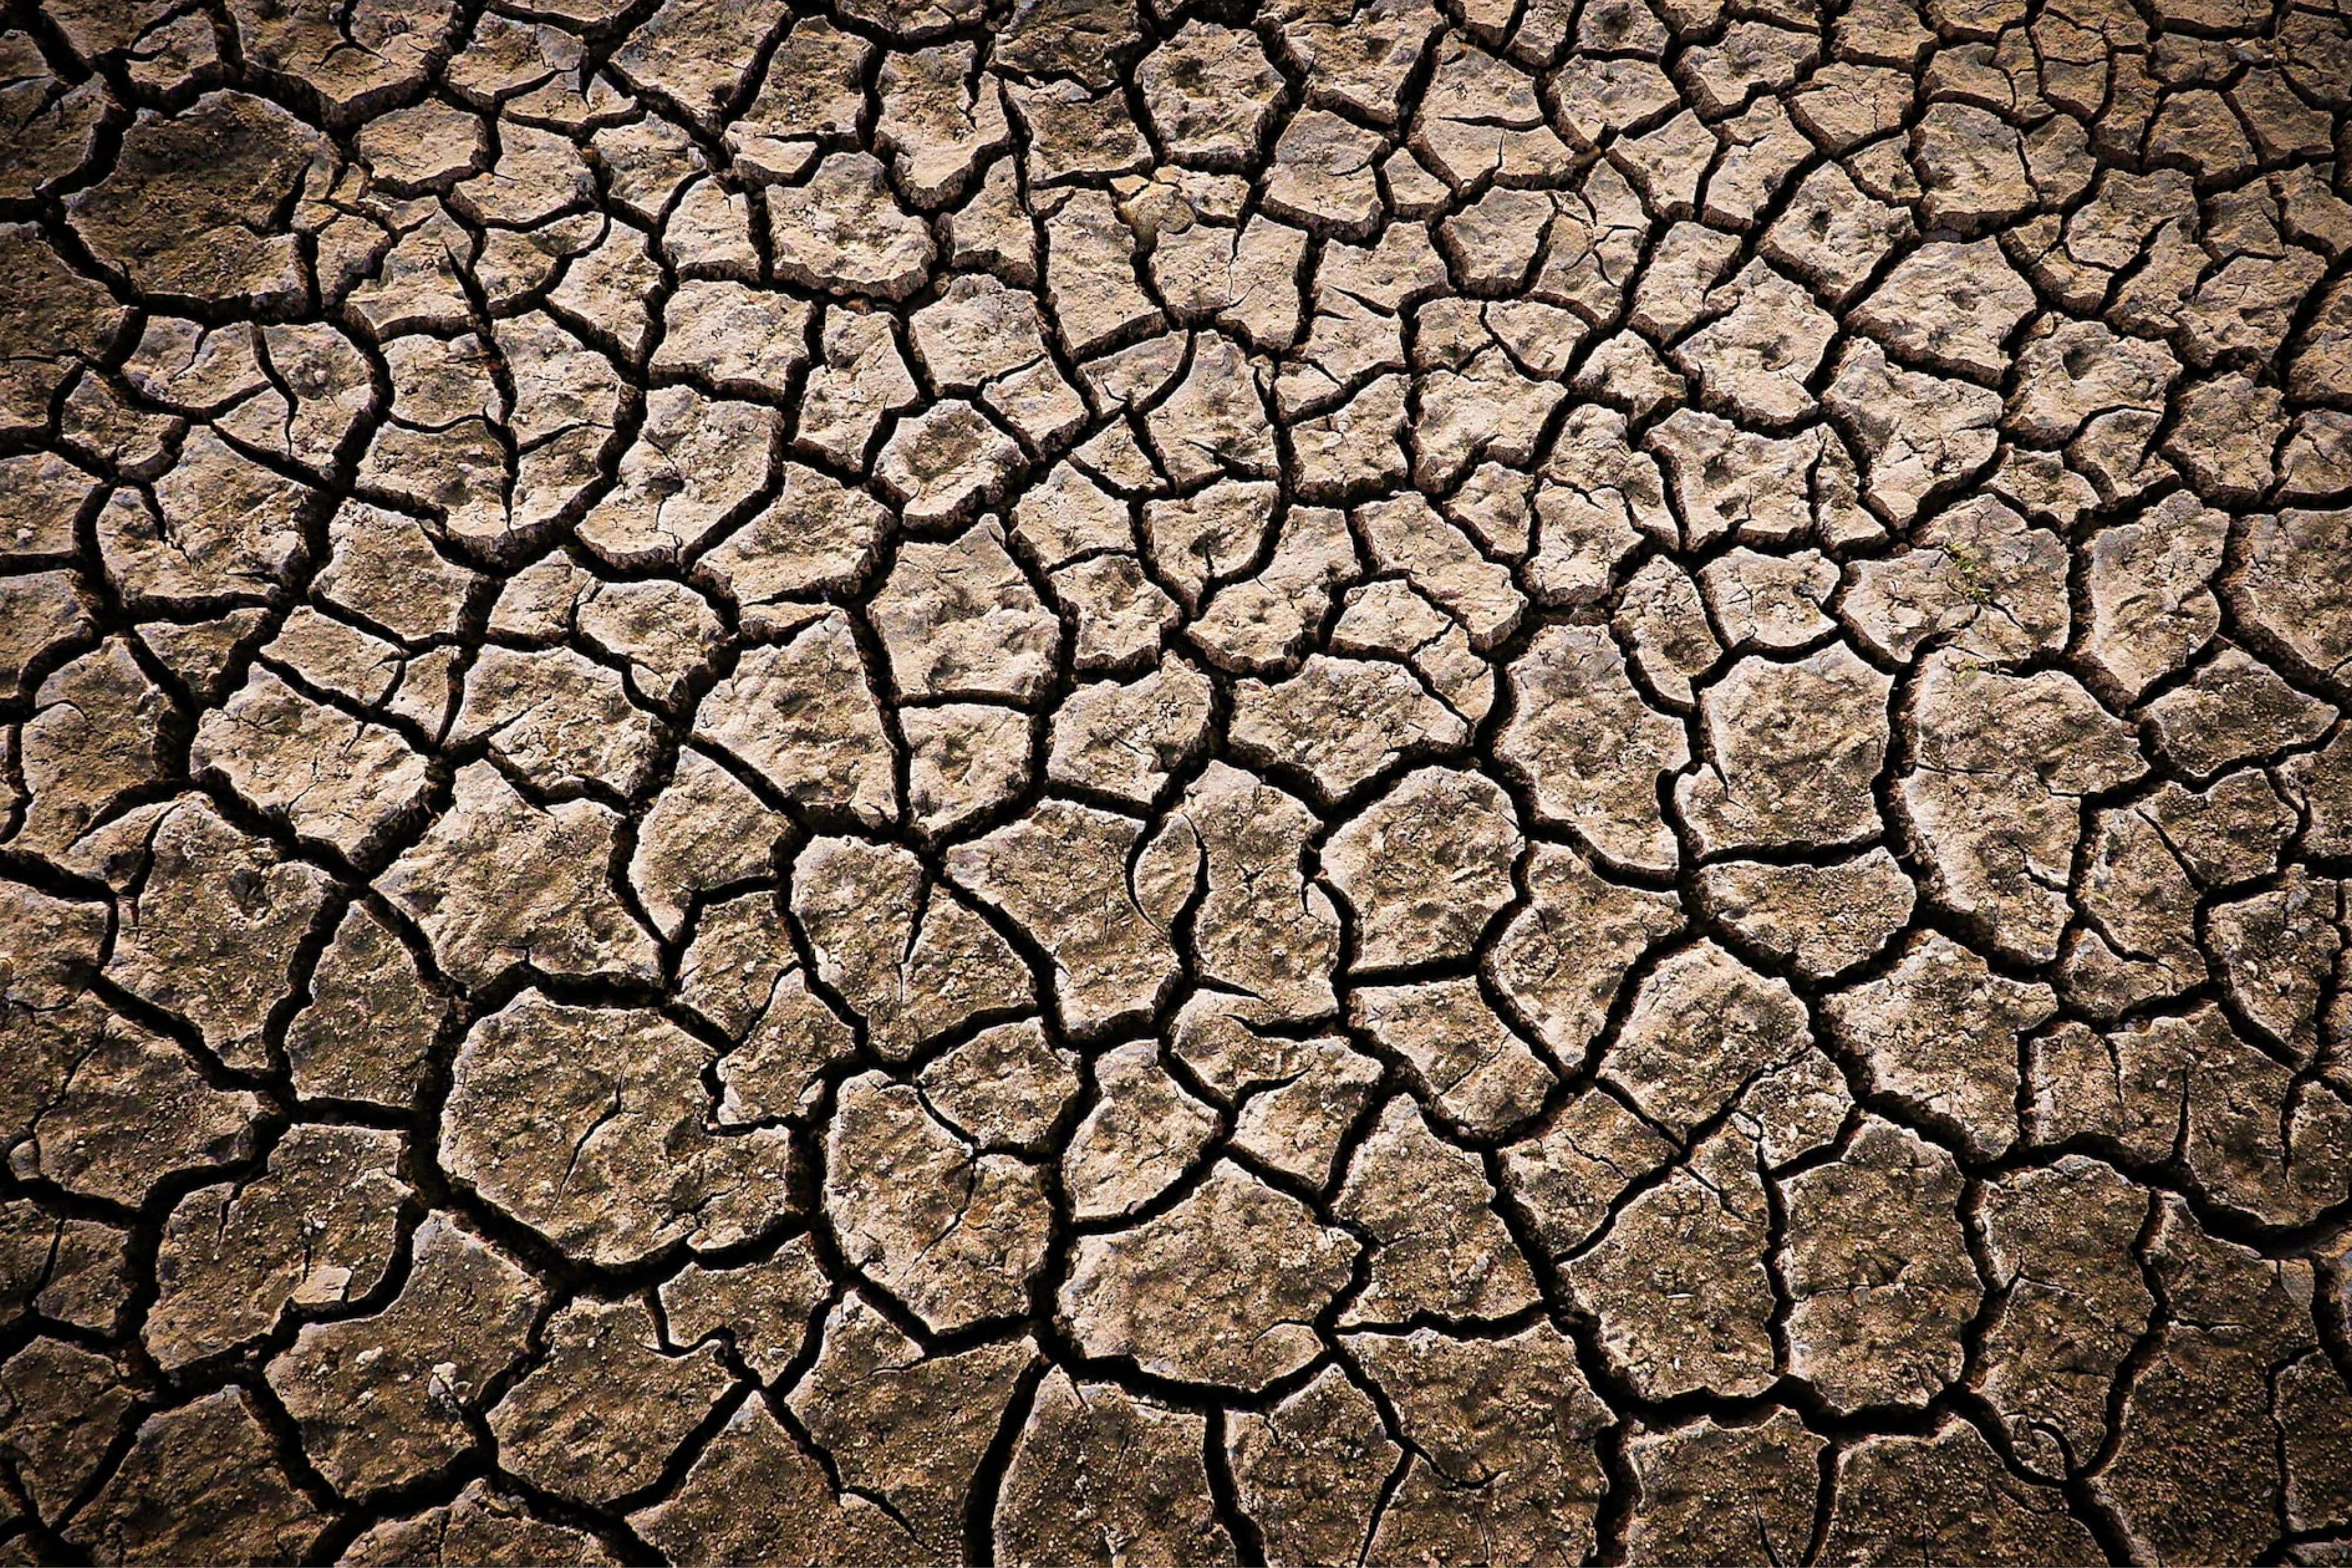 An image of a dry desert surface.